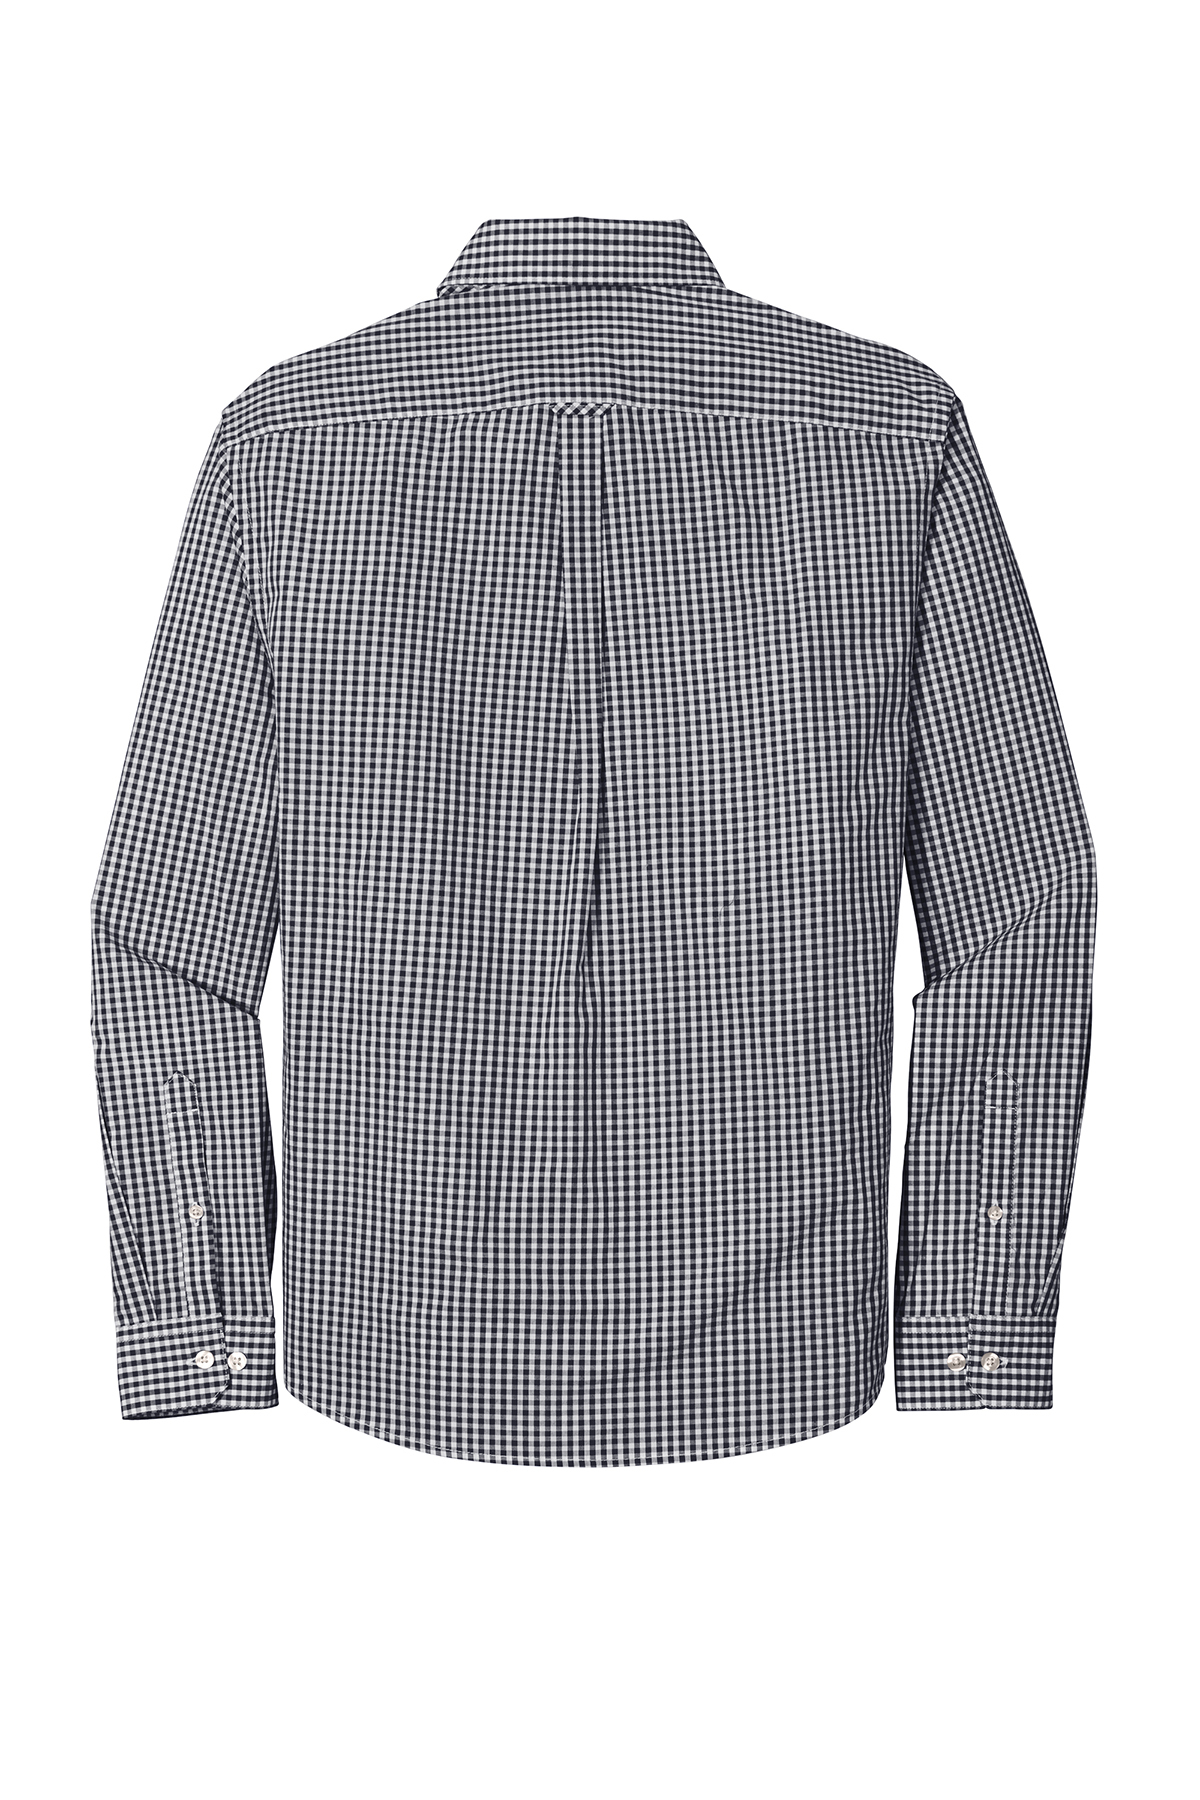 Port Authority Broadcloth Gingham Easy Care Shirt | Product | Port ...